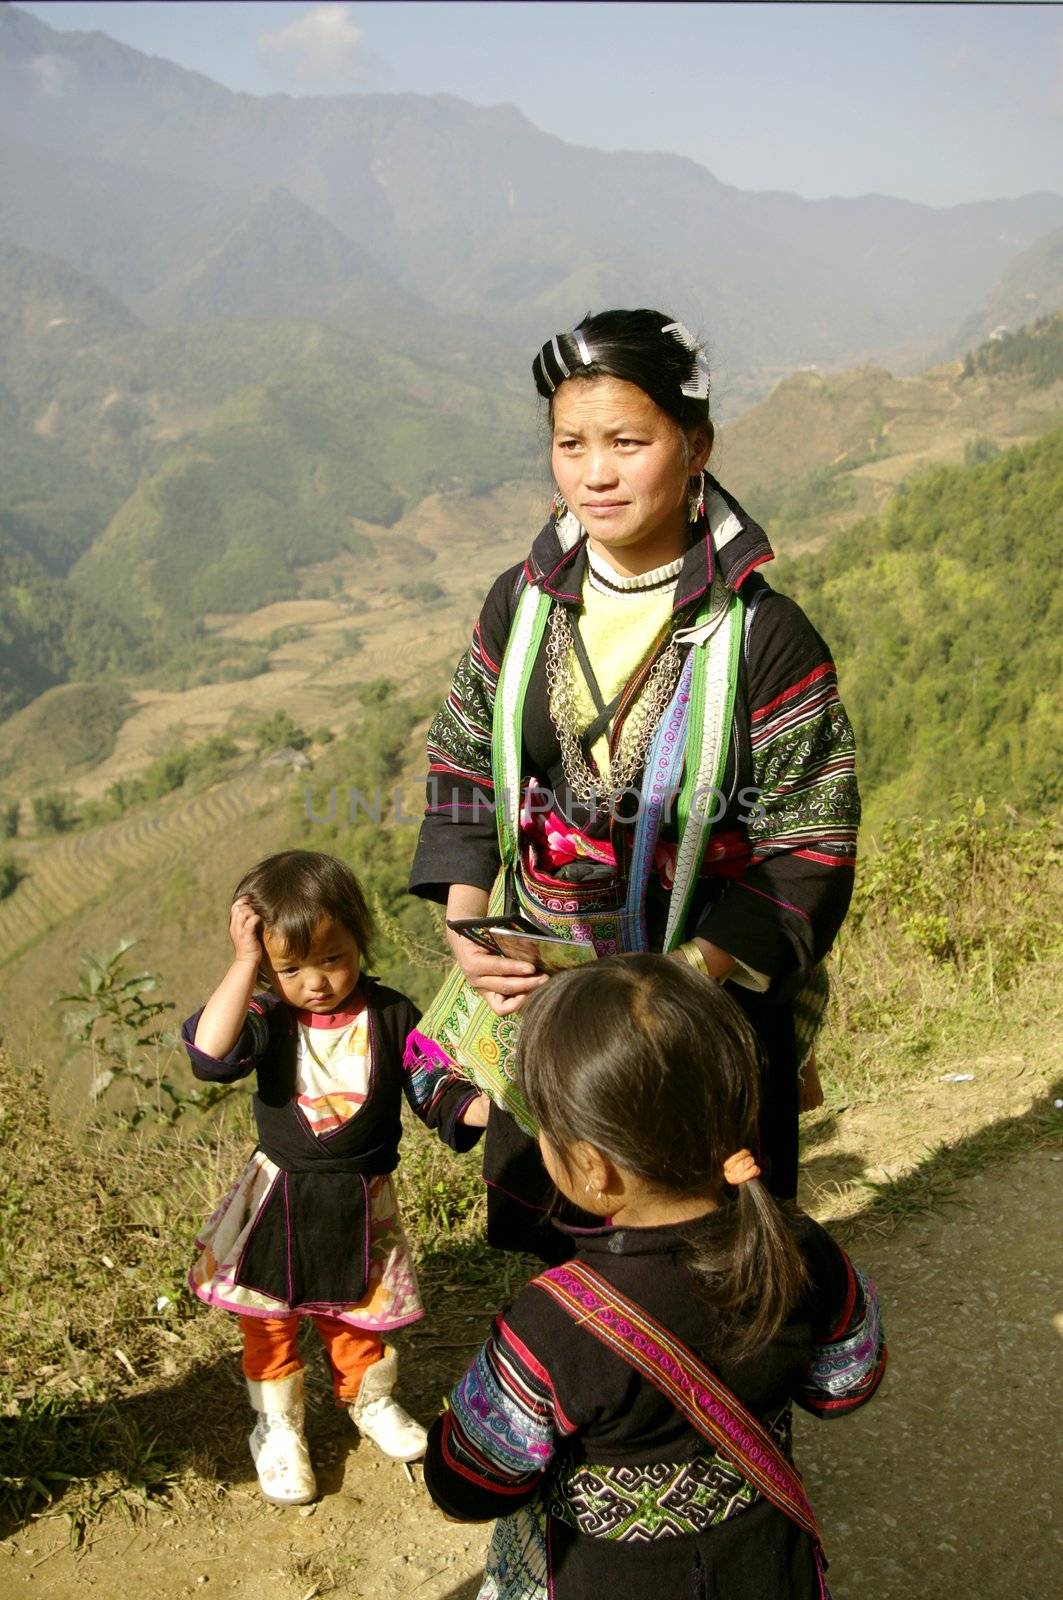 Black Hmong woman and babies by Duroc